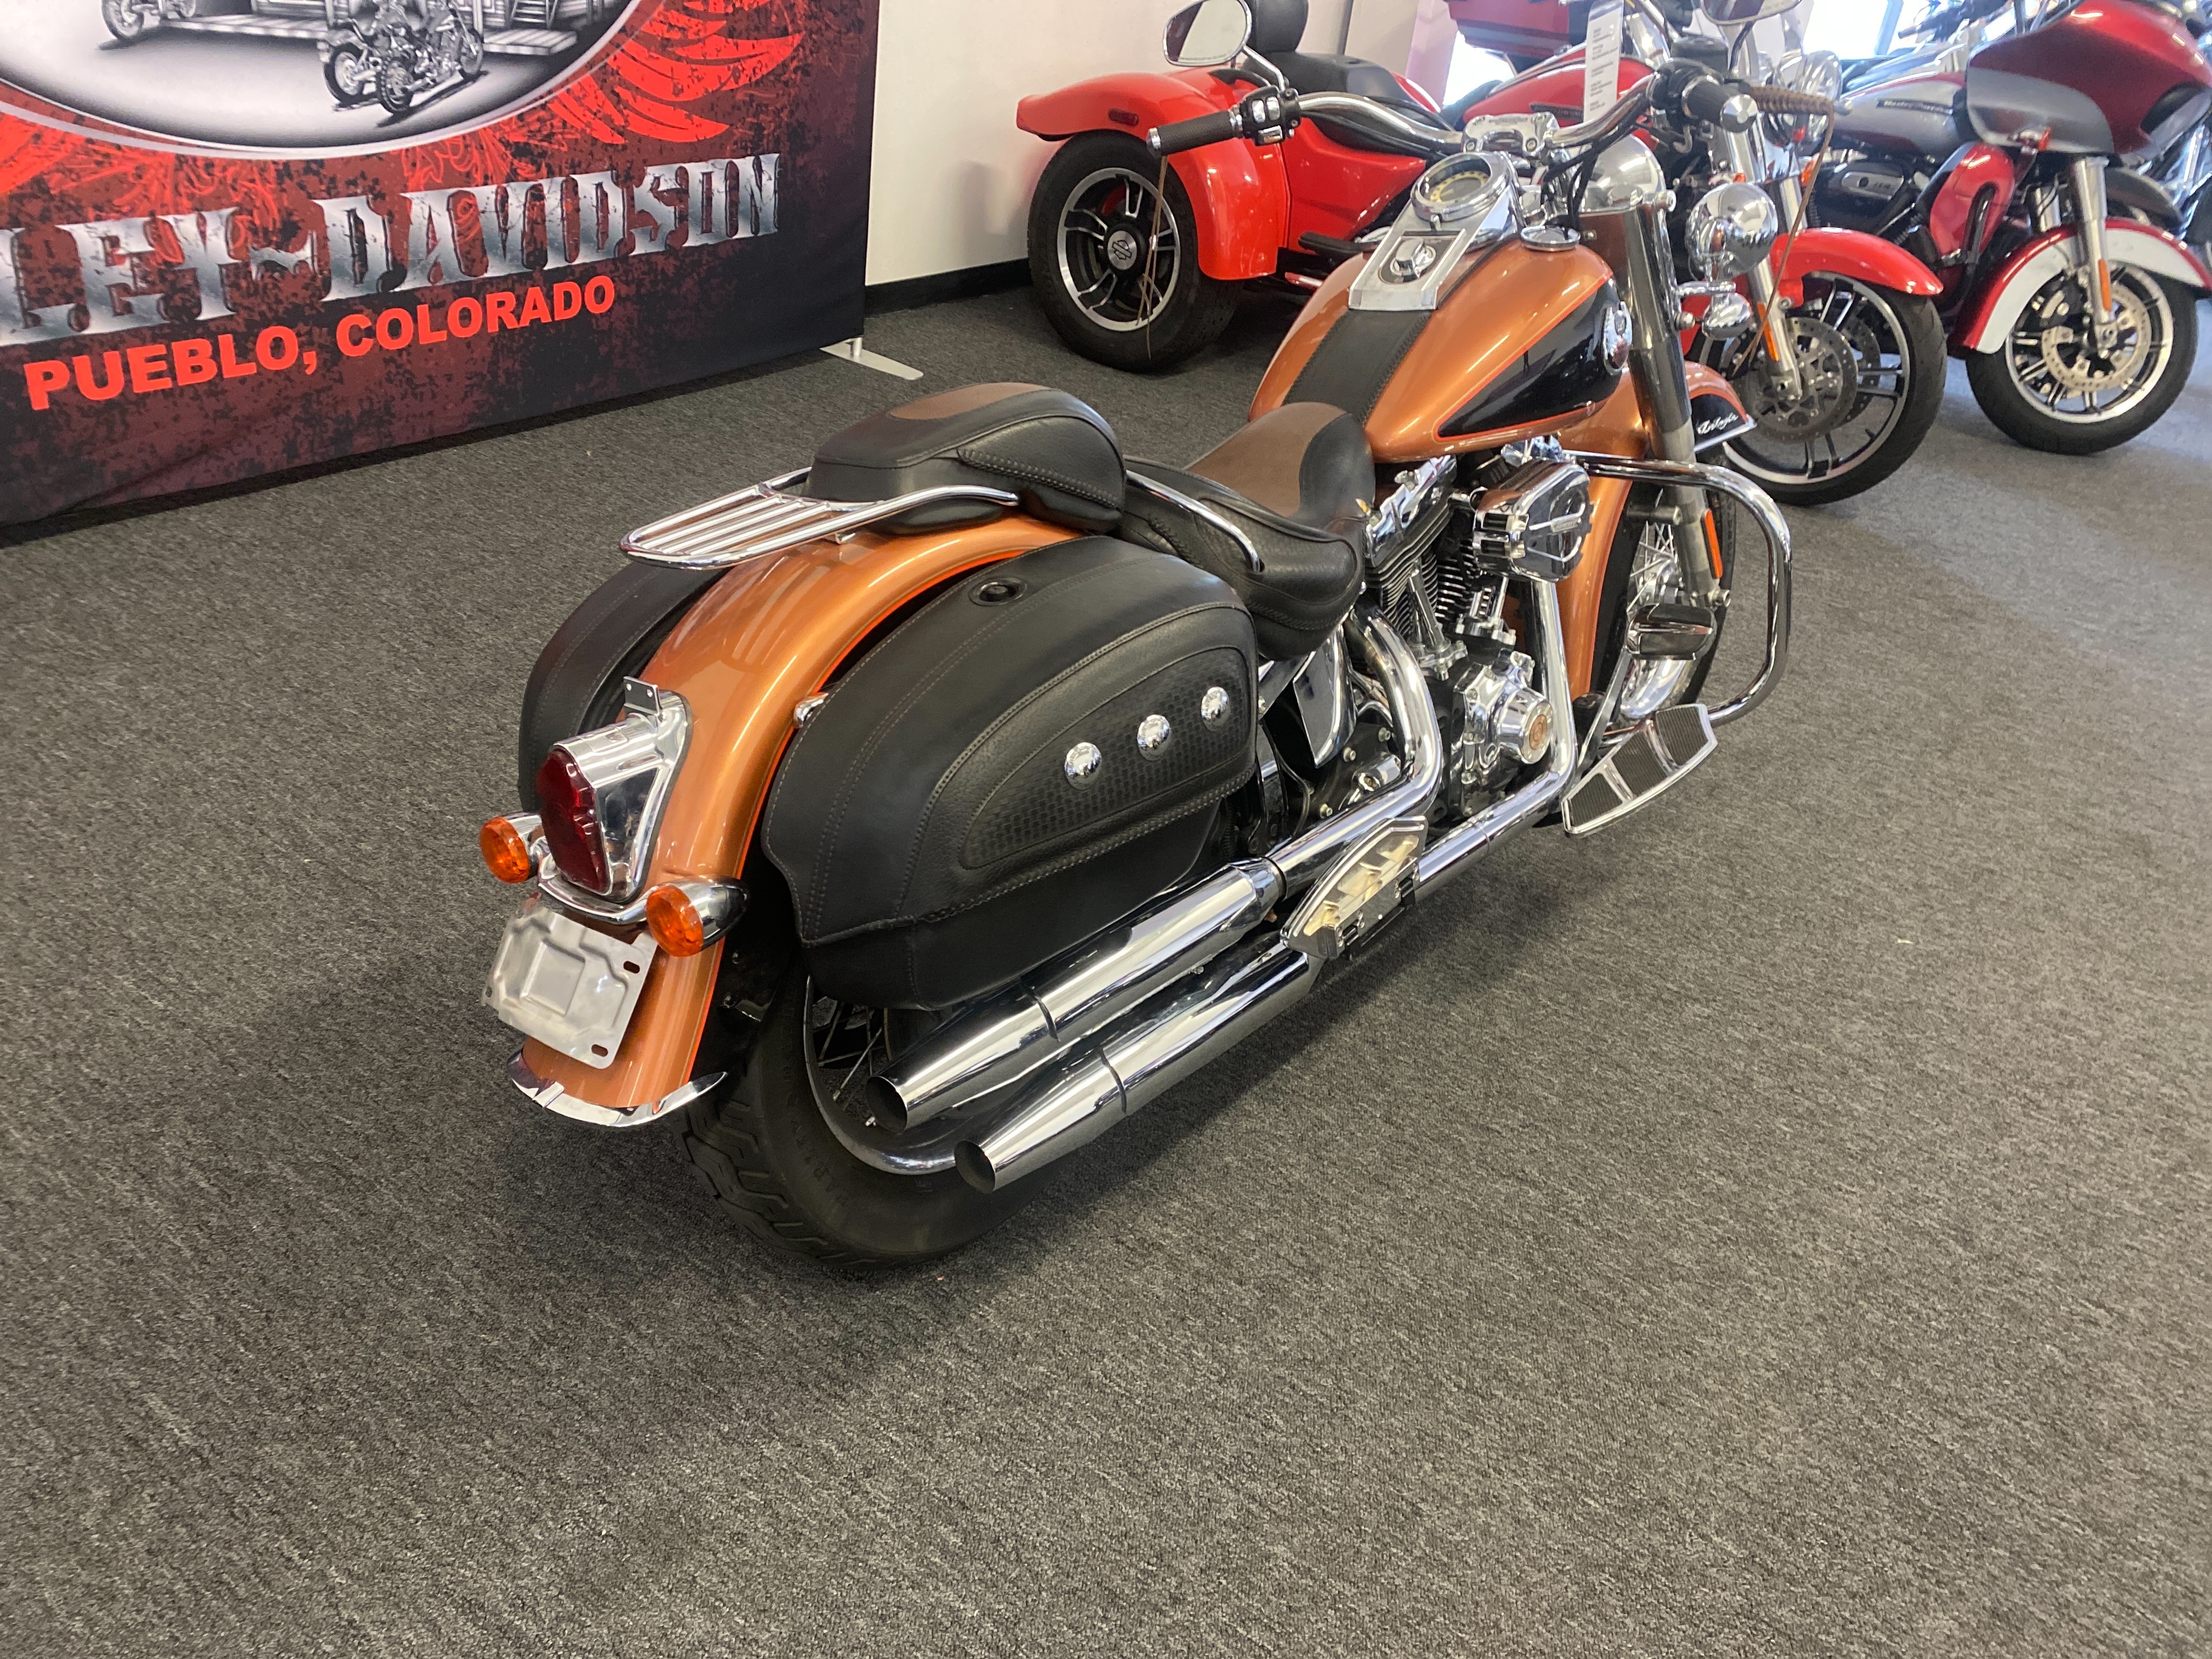 2008 Harley-Davidson Softail Deluxe at Outpost Harley-Davidson